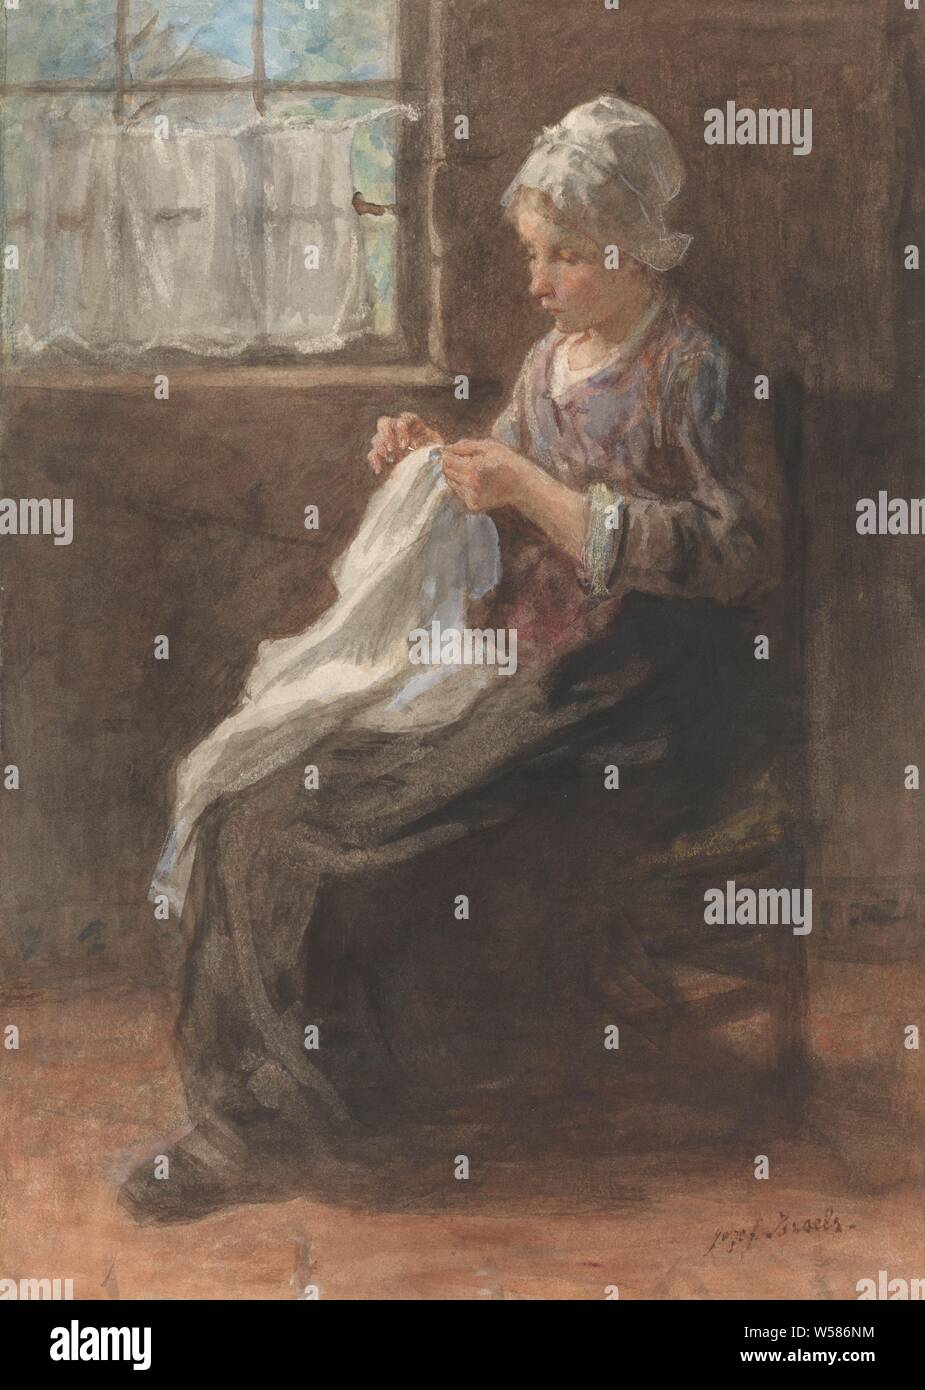 The dressmaker, sewing, Jozef Israels (mentioned on object), 1834 - 1911, paper, brush, h 414 mm × w 304 mm Stock Photo